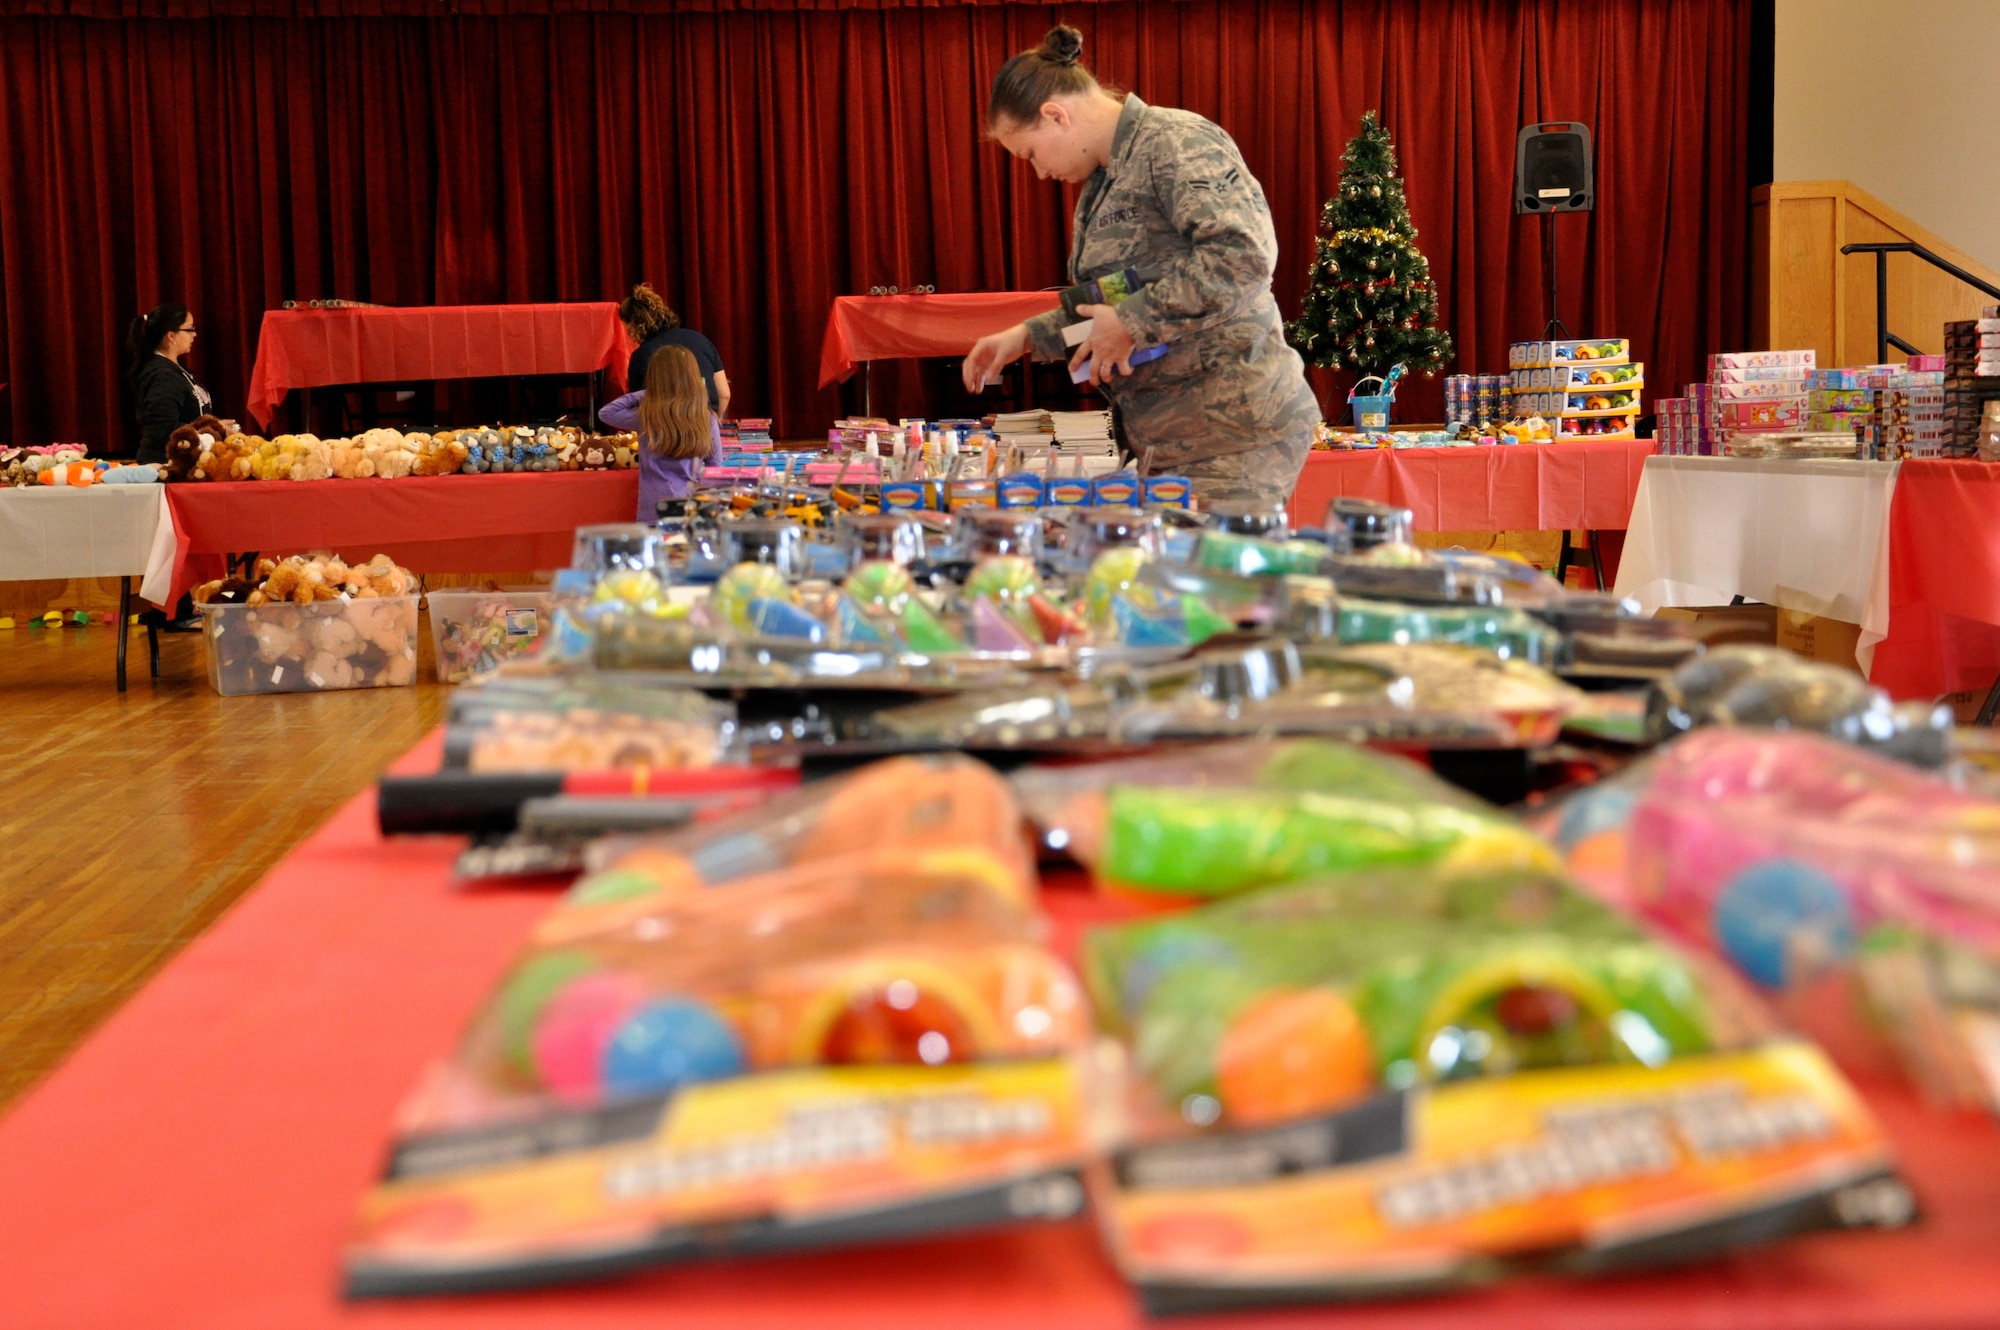 Volunteers organize toys before Operation Homefront Dec. 17, 2013, at Little Rock Base, Ark. Approximately 6,000 toys were distributed to Airmen ranking E-6 and below. (U.S. Air Force photo by Senior Airman Regina Agoha)